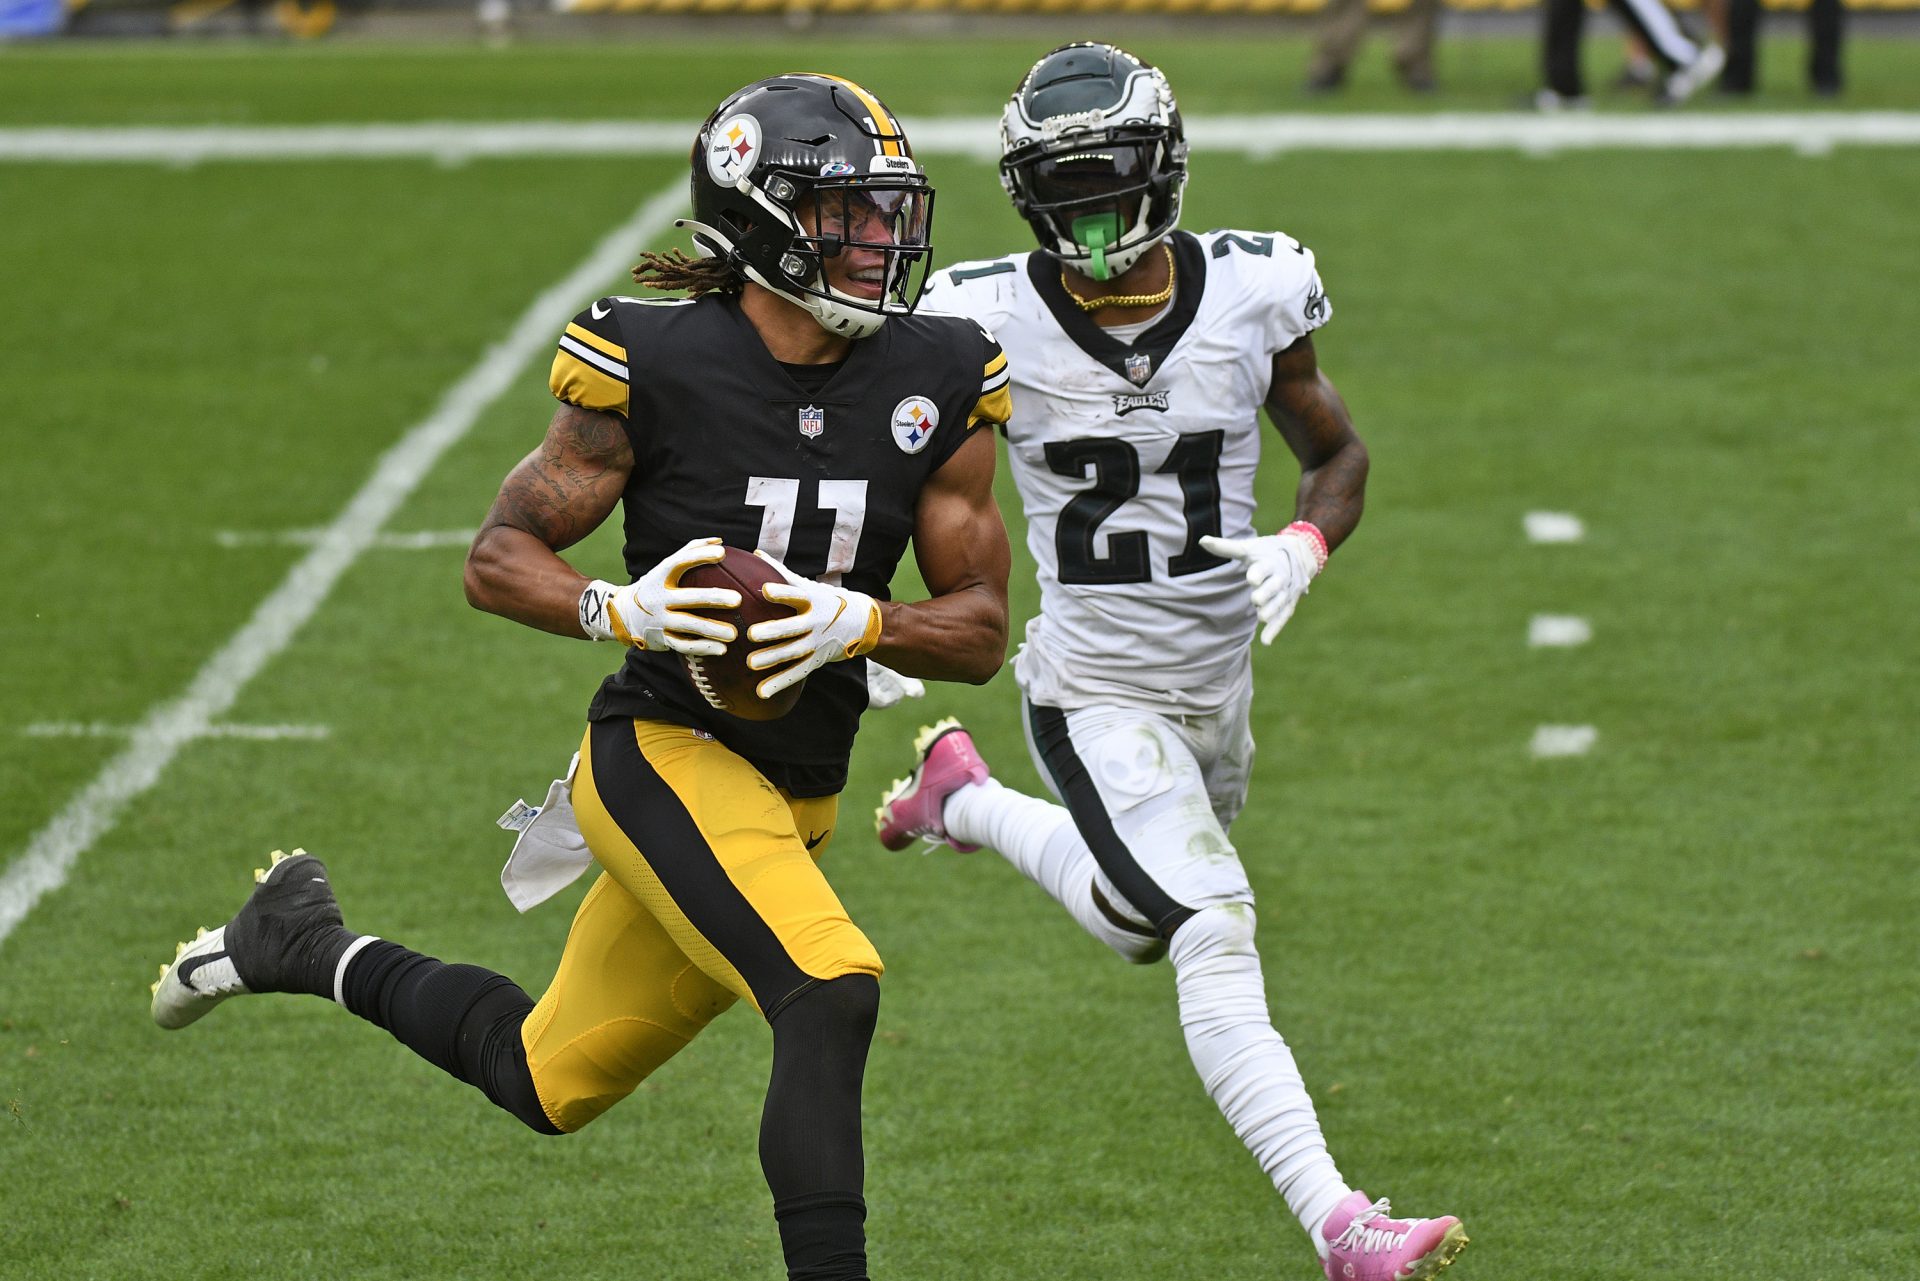 Pittsburgh Steelers wide receiver Chase Claypool (11) beats Philadelphia Eagles strong safety Jalen Mills (21) to the end zone for a touchdown during the first half of an NFL football game in Pittsburgh, Sunday, Oct. 11, 2020.